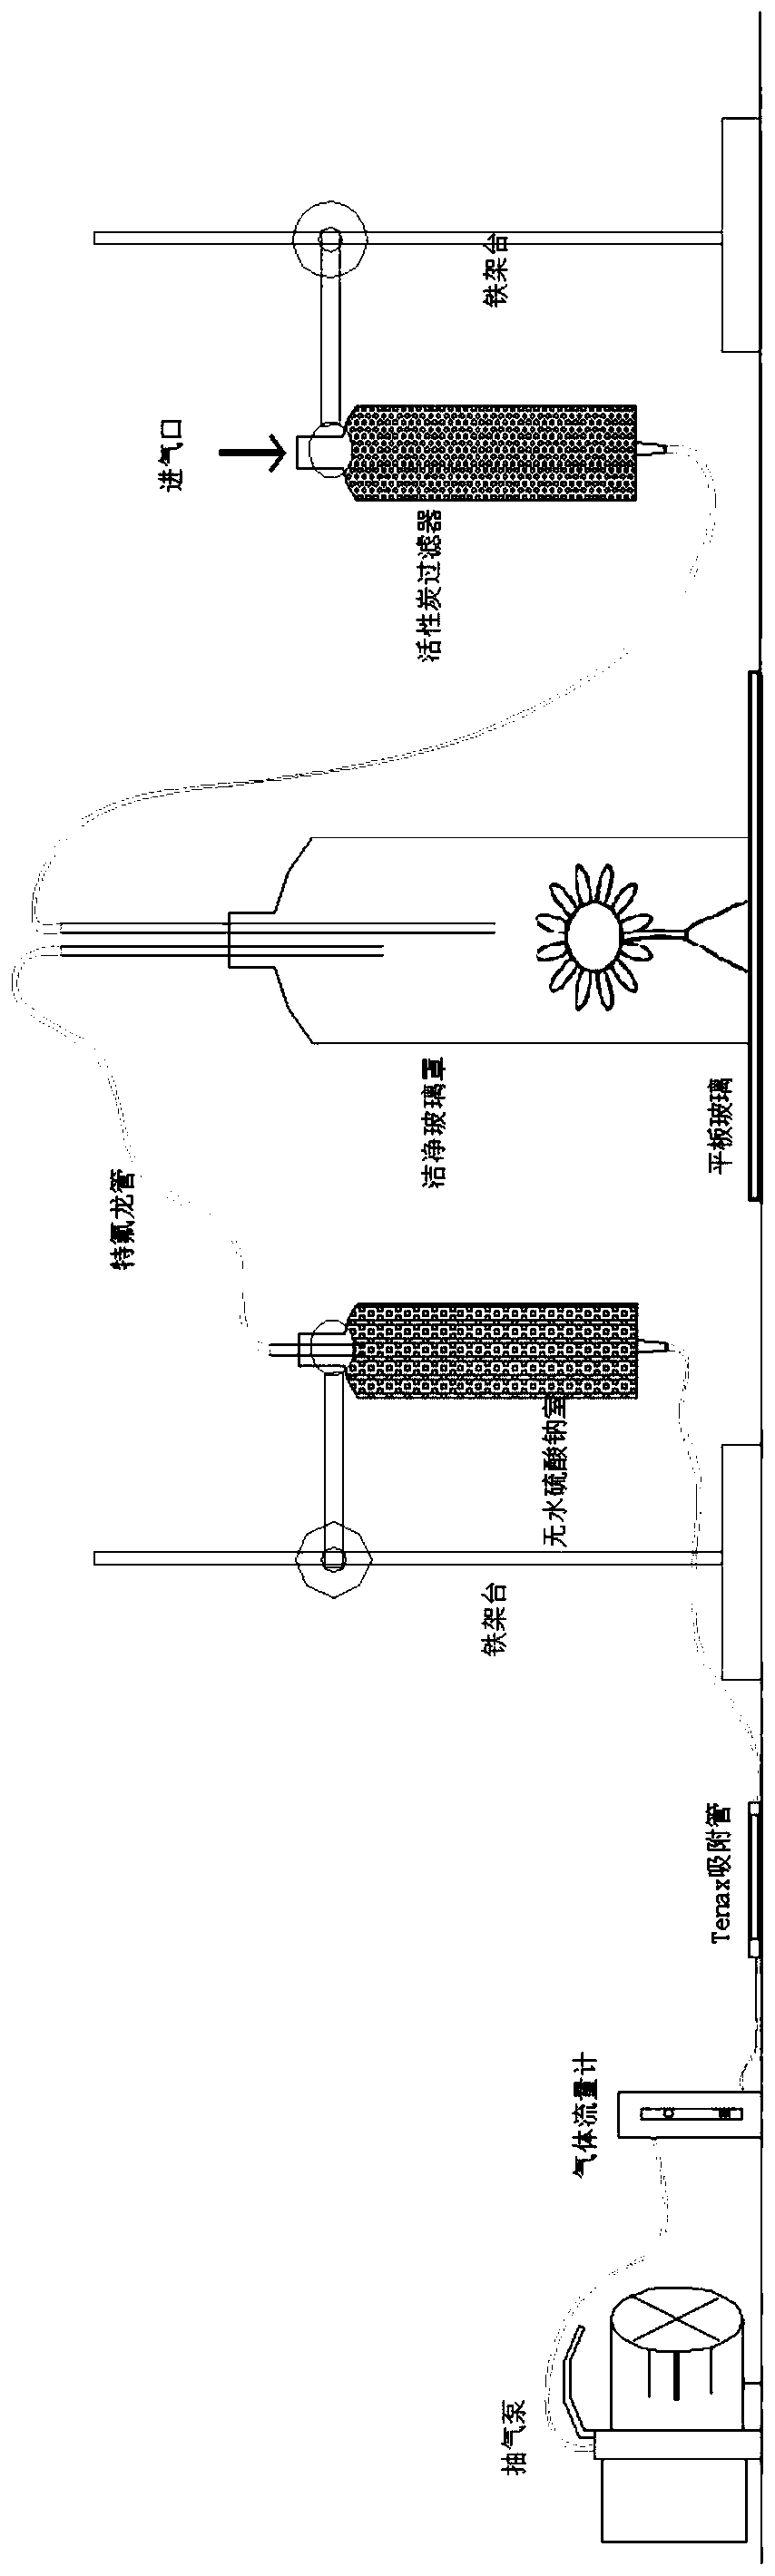 Method and device for collecting volatiles of sunflower disks